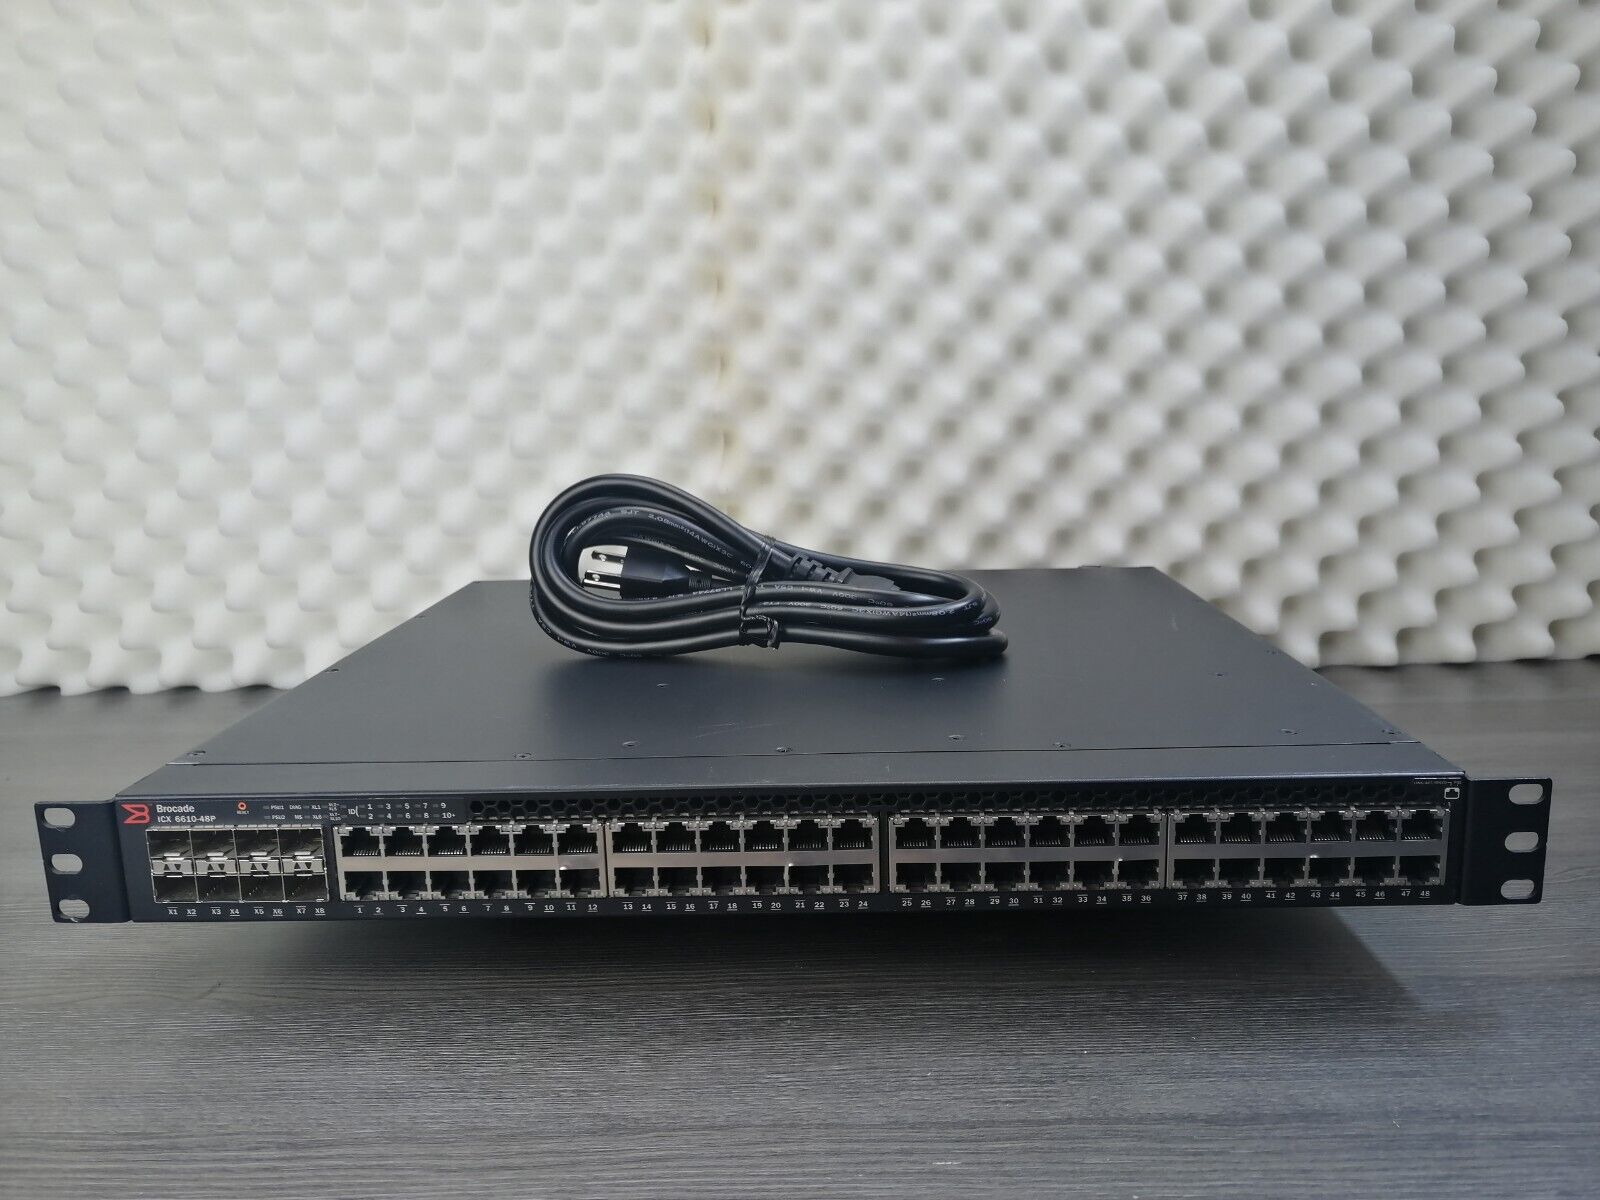 Brocade ICX6610-48P-E 48 Port Gigabit Switch WITH DUAL POWER - SAME DAY SHIPPING